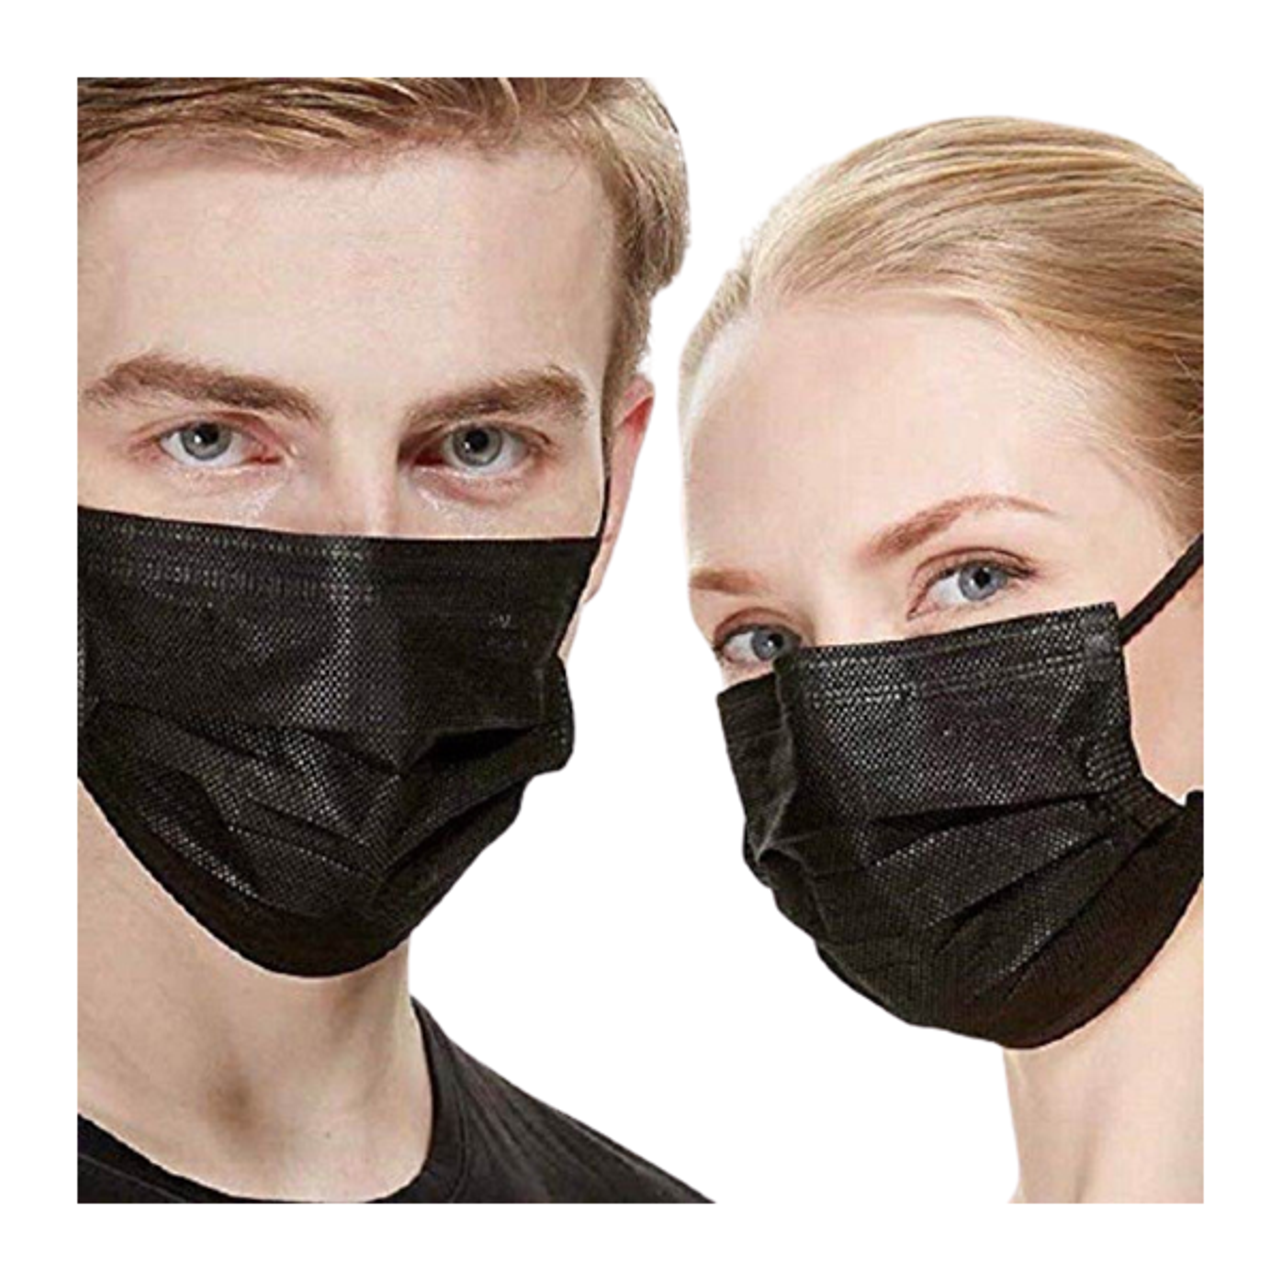 Black Disposable Non-Medical 3-Ply Face Mask (50- to 2,000-Pack) product image